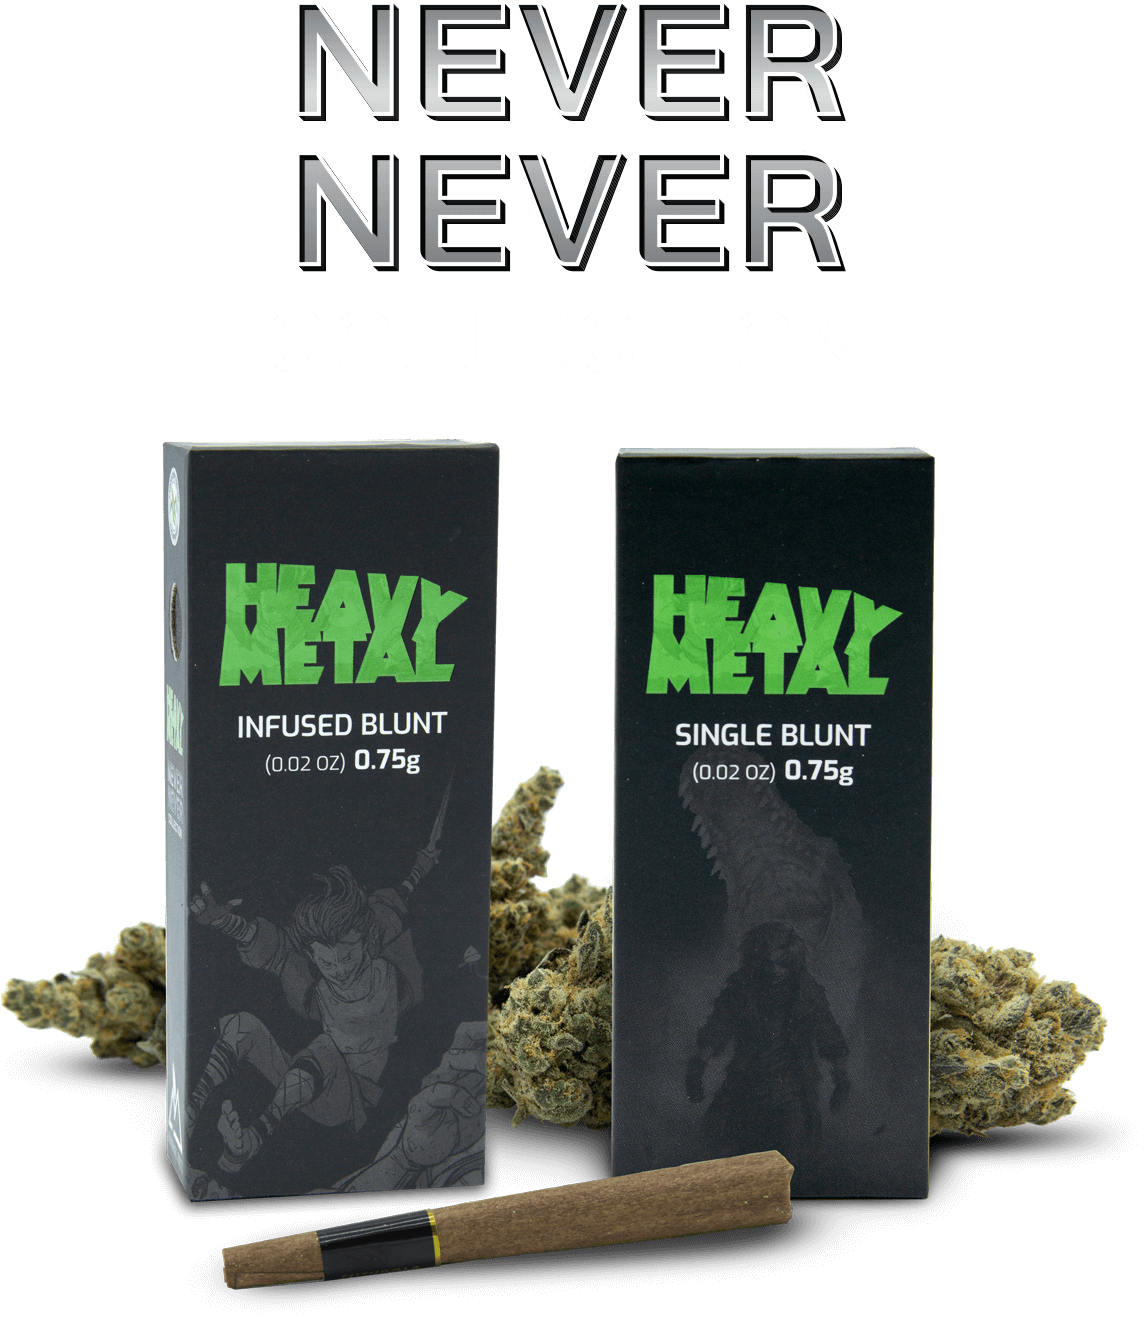 Heavy-Metal-Cannabis-NeverNever-collection